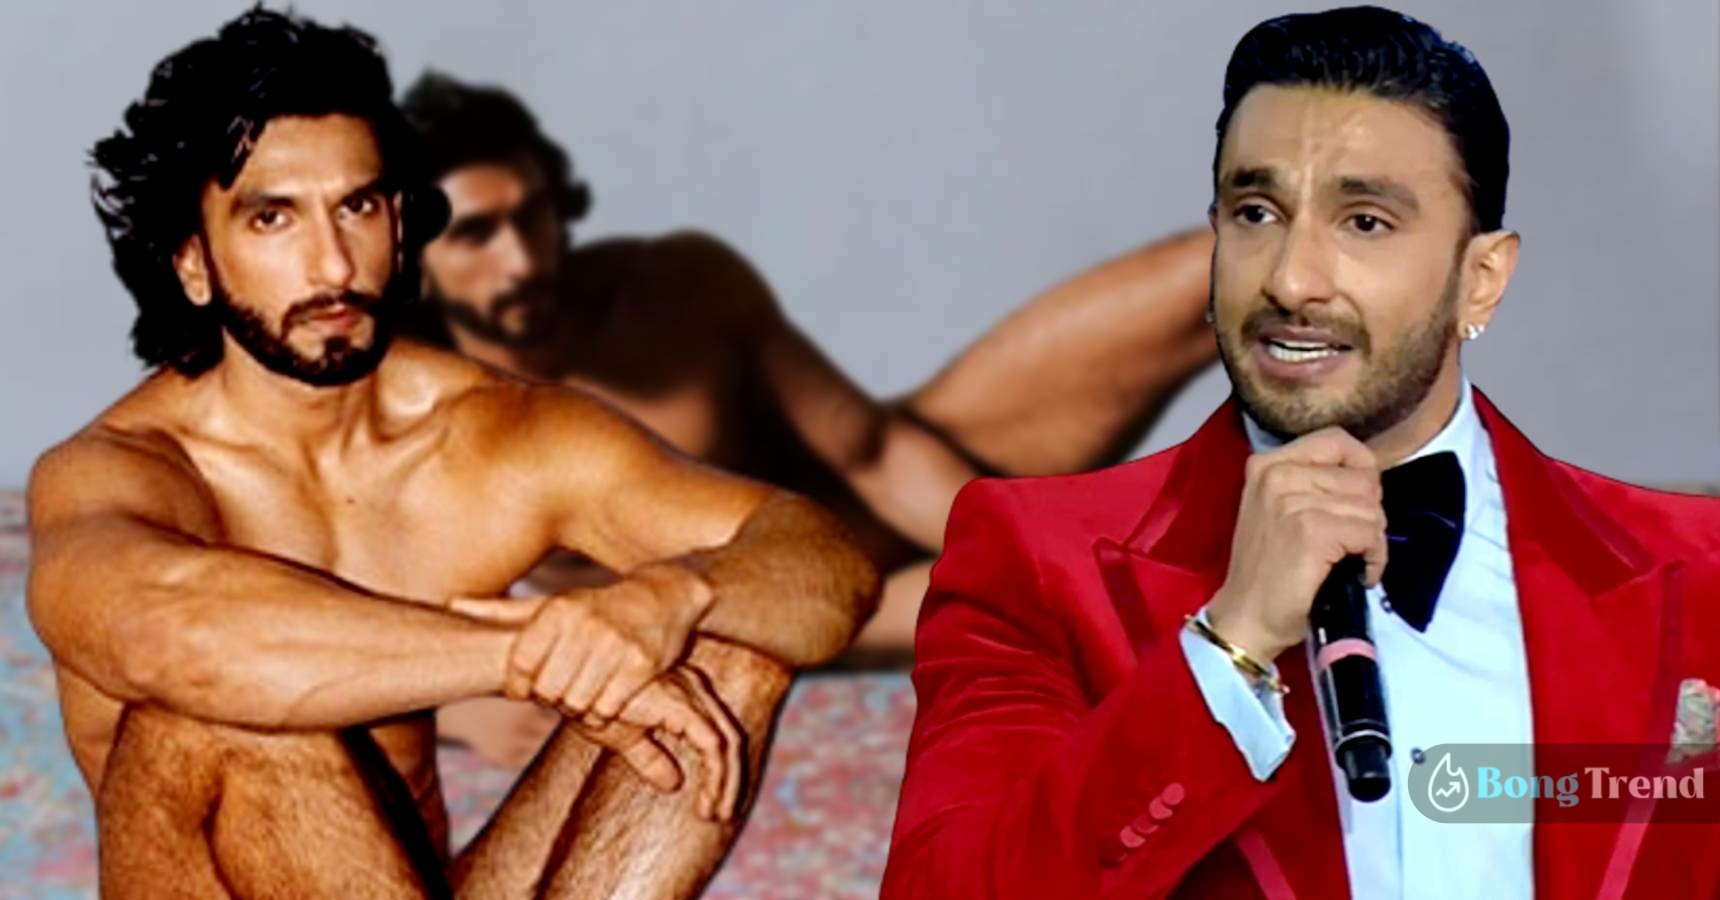 Ranveer Singh says the picture revealing his private parts is ‘Morphed’